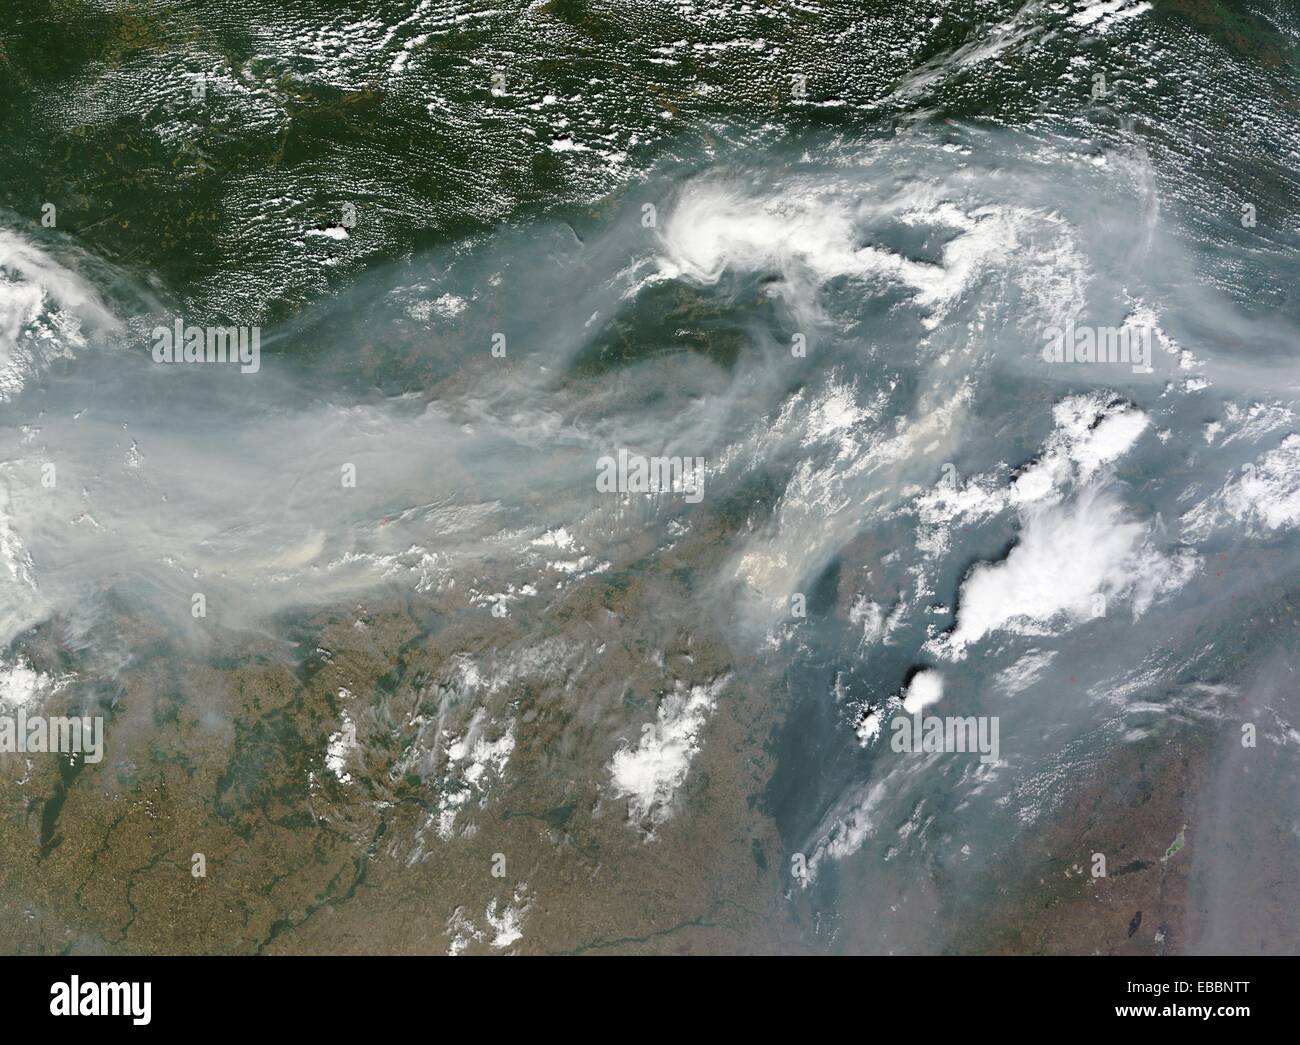 Hundreds of fires burned across western Russia on August 2, 2010, but it is the smoke that conveys the magnitude of the Stock Photo